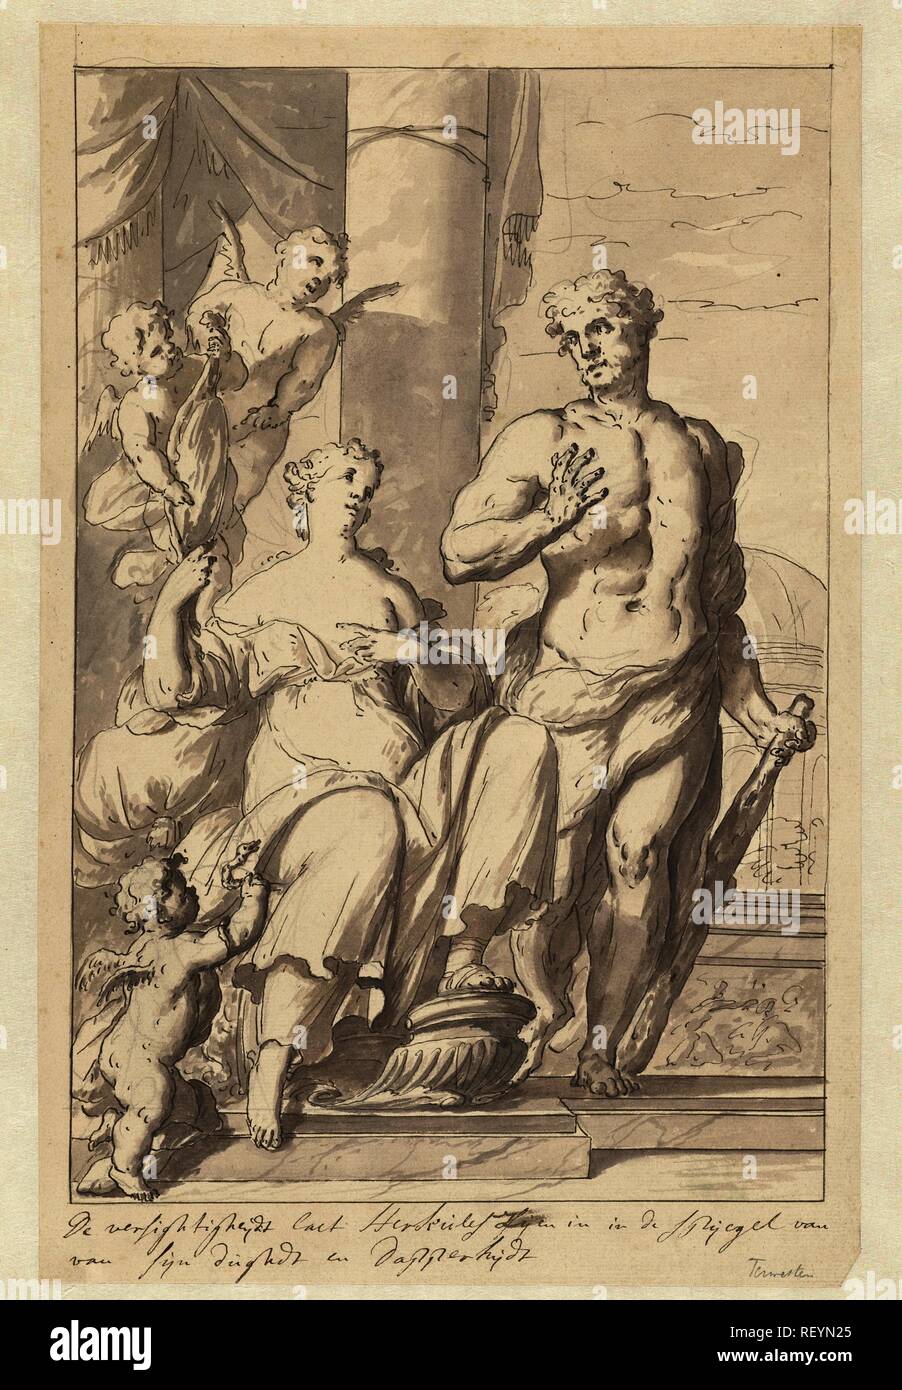 The Caution shows Hercules the mirror of virtue and courage. Draughtsman: Mattheus Terwesten. Dating: 1680 - 1757. Measurements: h 281 mm × w 184 mm. Museum: Rijksmuseum, Amsterdam. Stock Photo